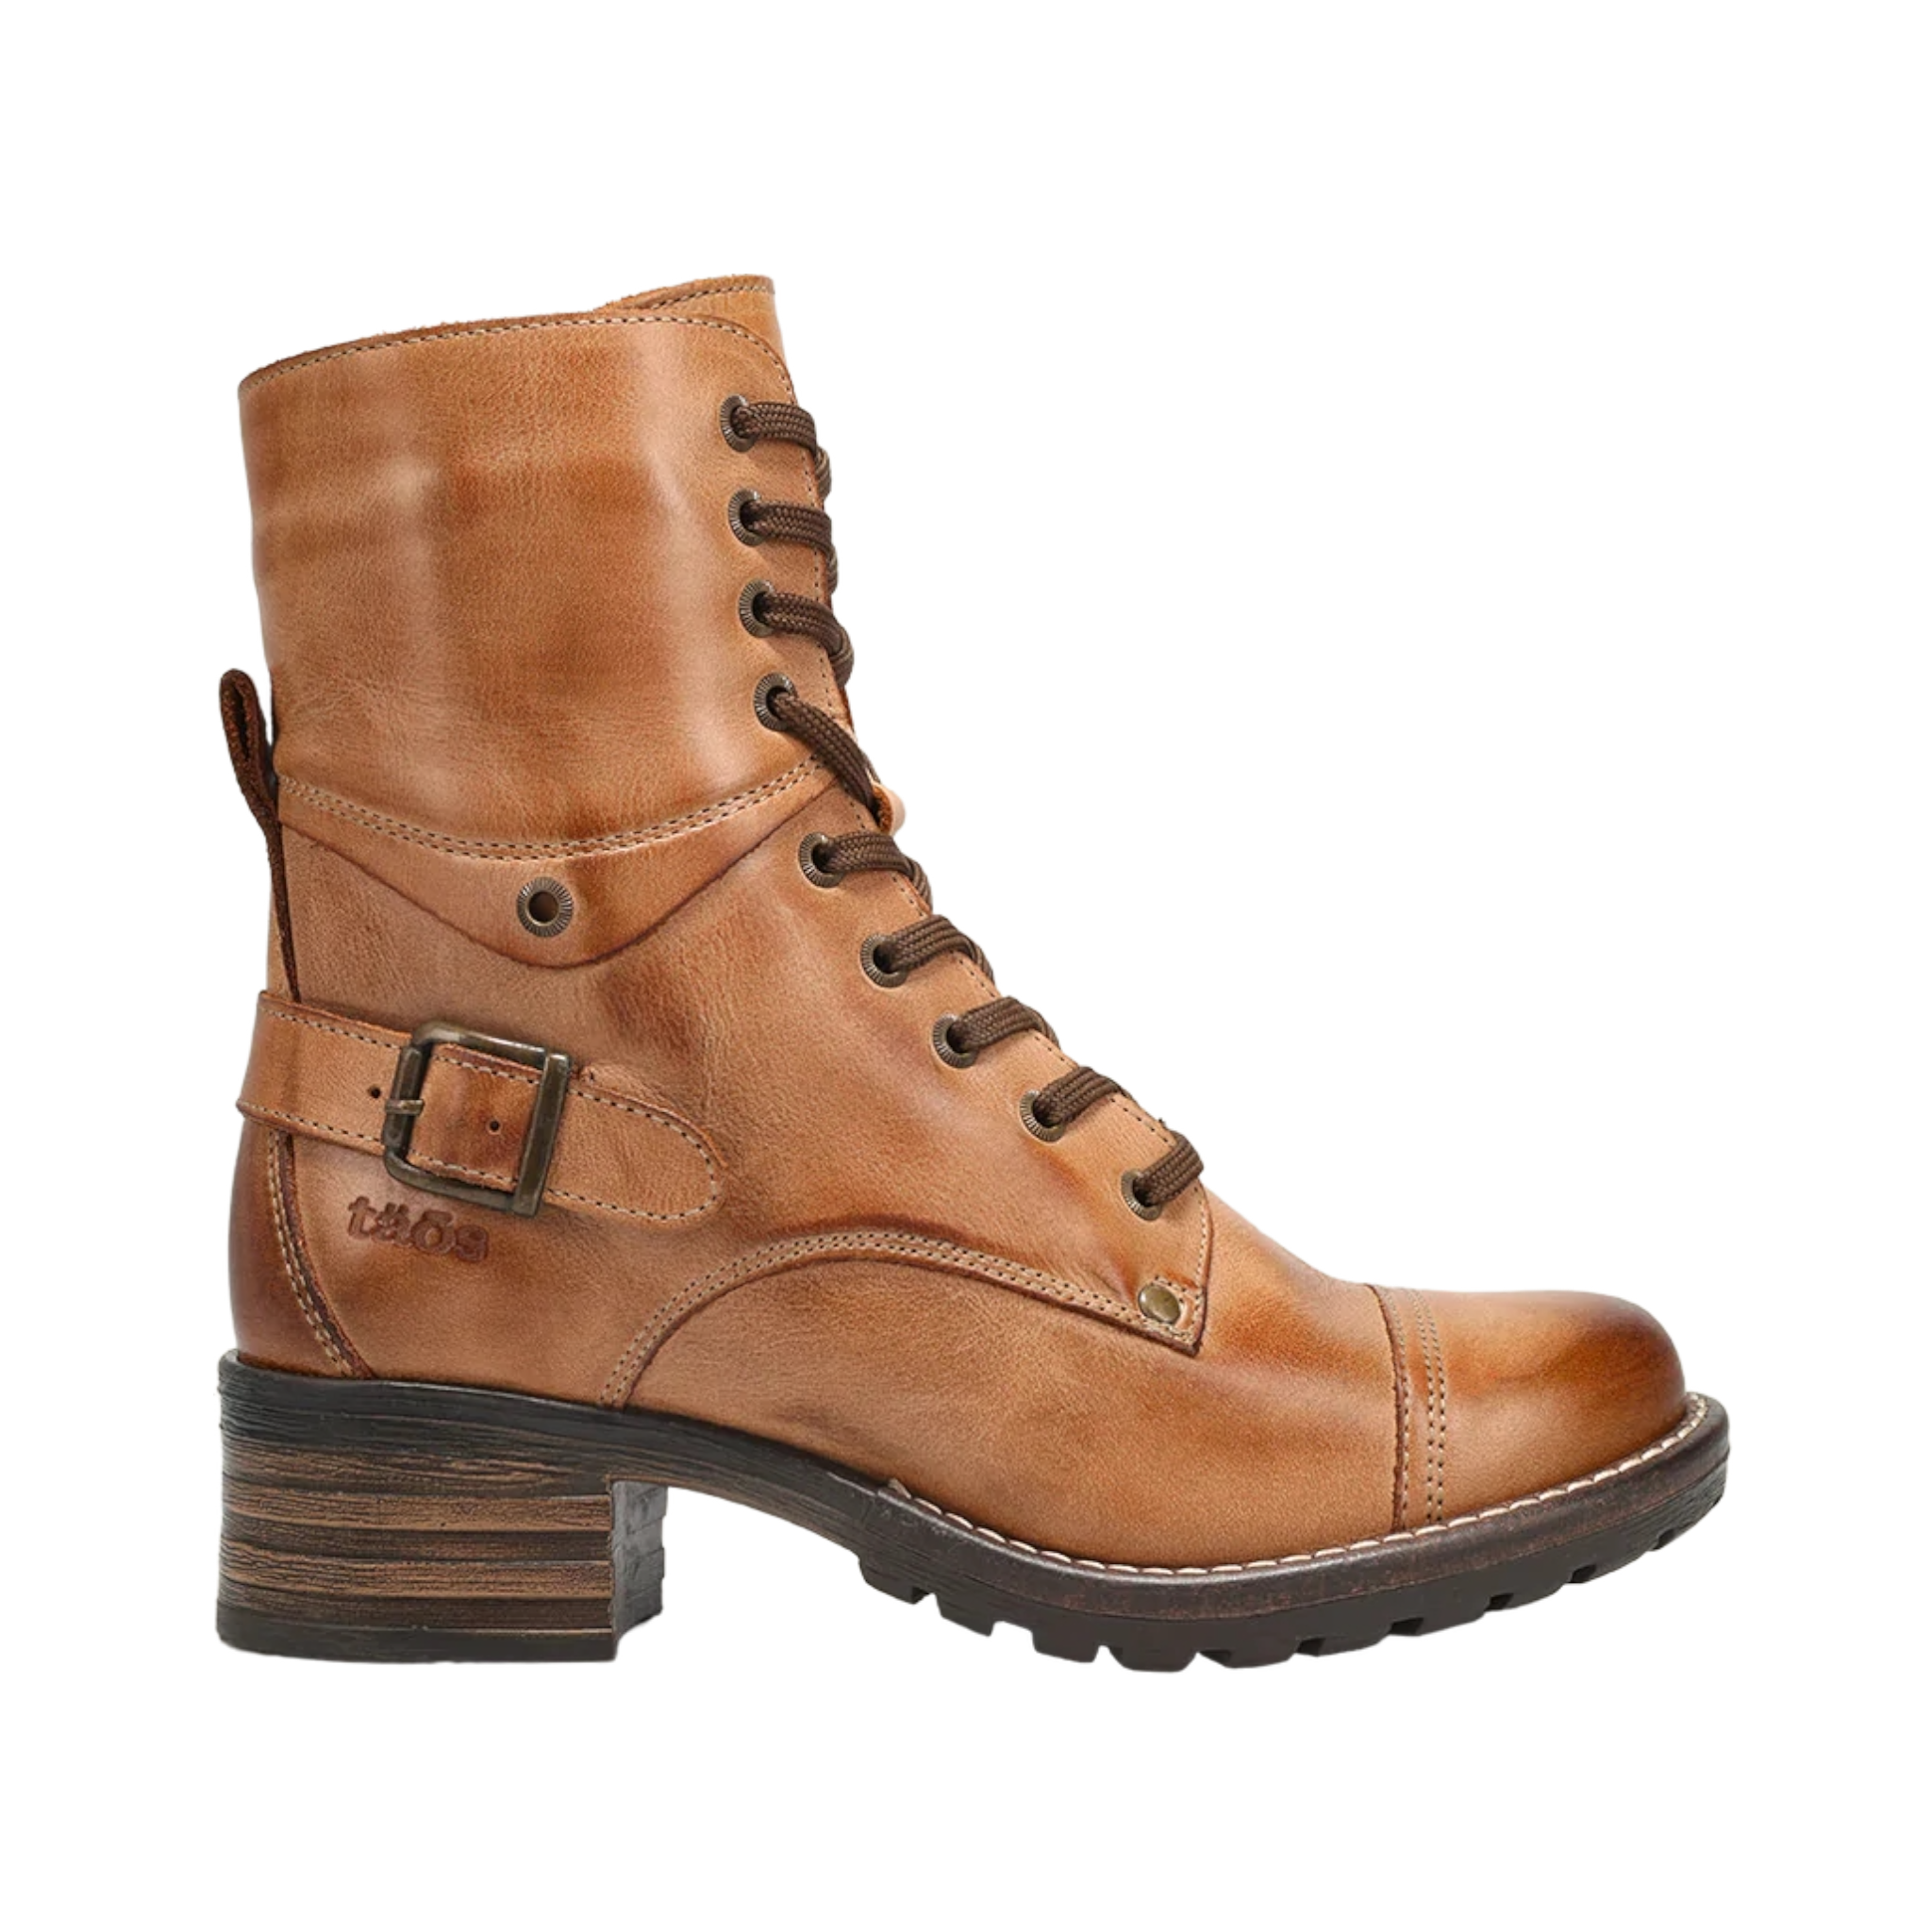 Taos Crave Leather Boots, Official Online Store + FREE SHIPPING